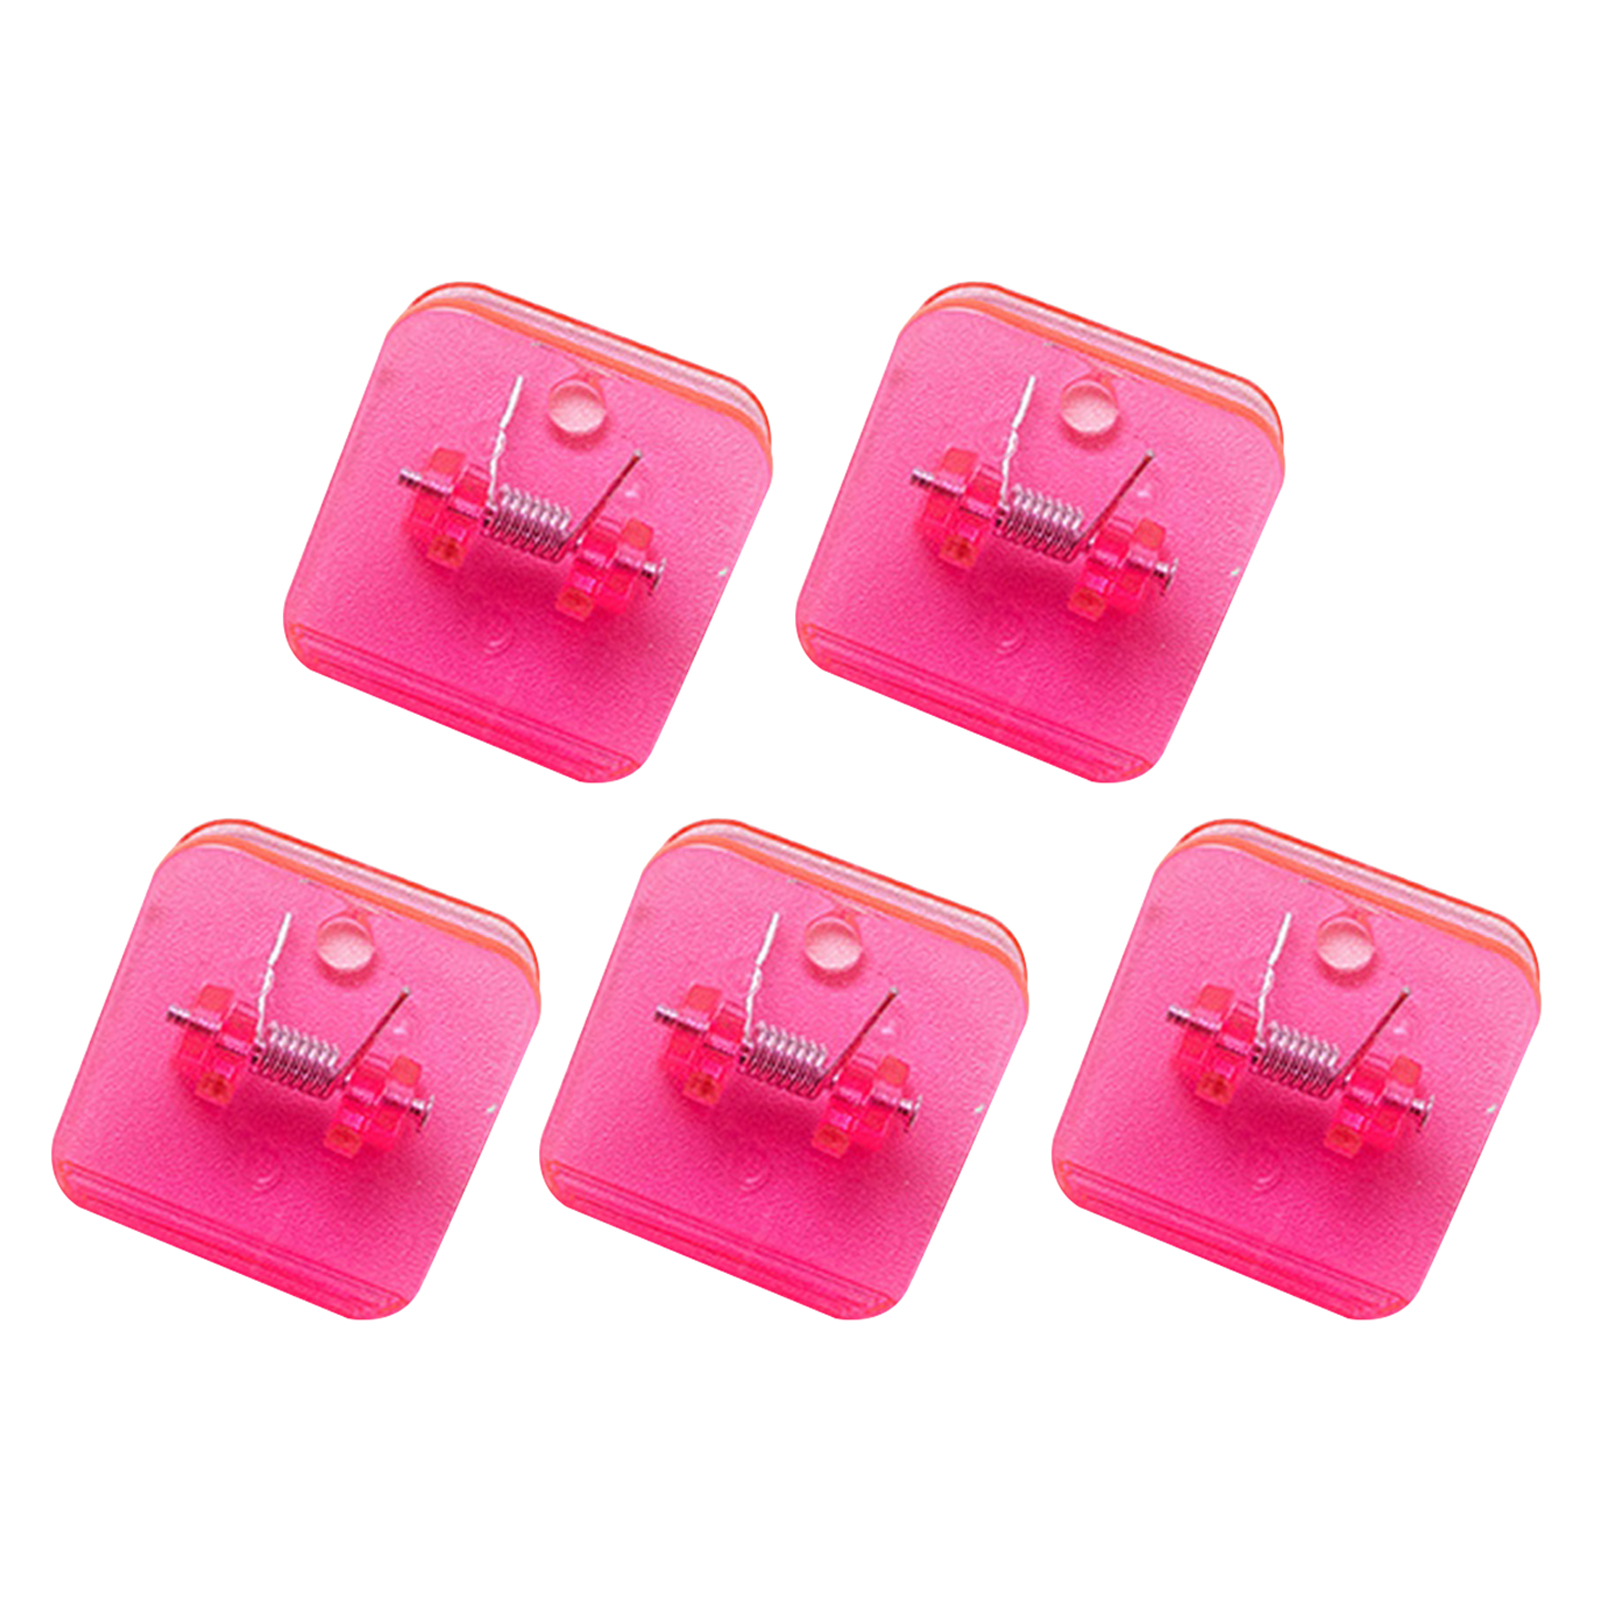 Yesbay 5Pcs File Clip Indeformable Acrylic Widely Used Square Binder Clip Office Supplies - image 2 of 8